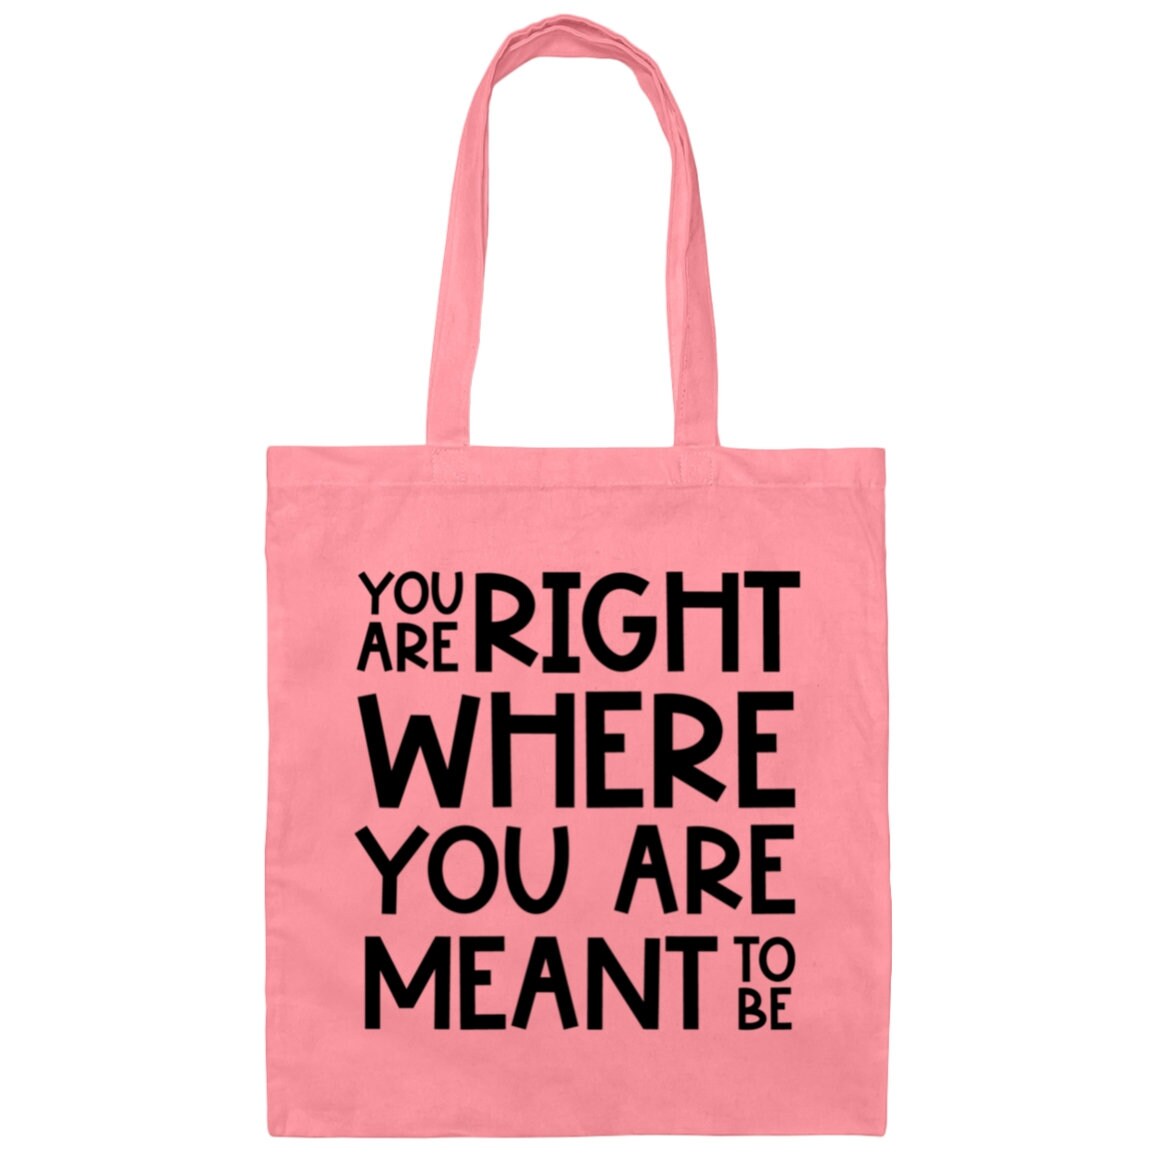 You Are Right Where You Are Meant To Be Tote Bag